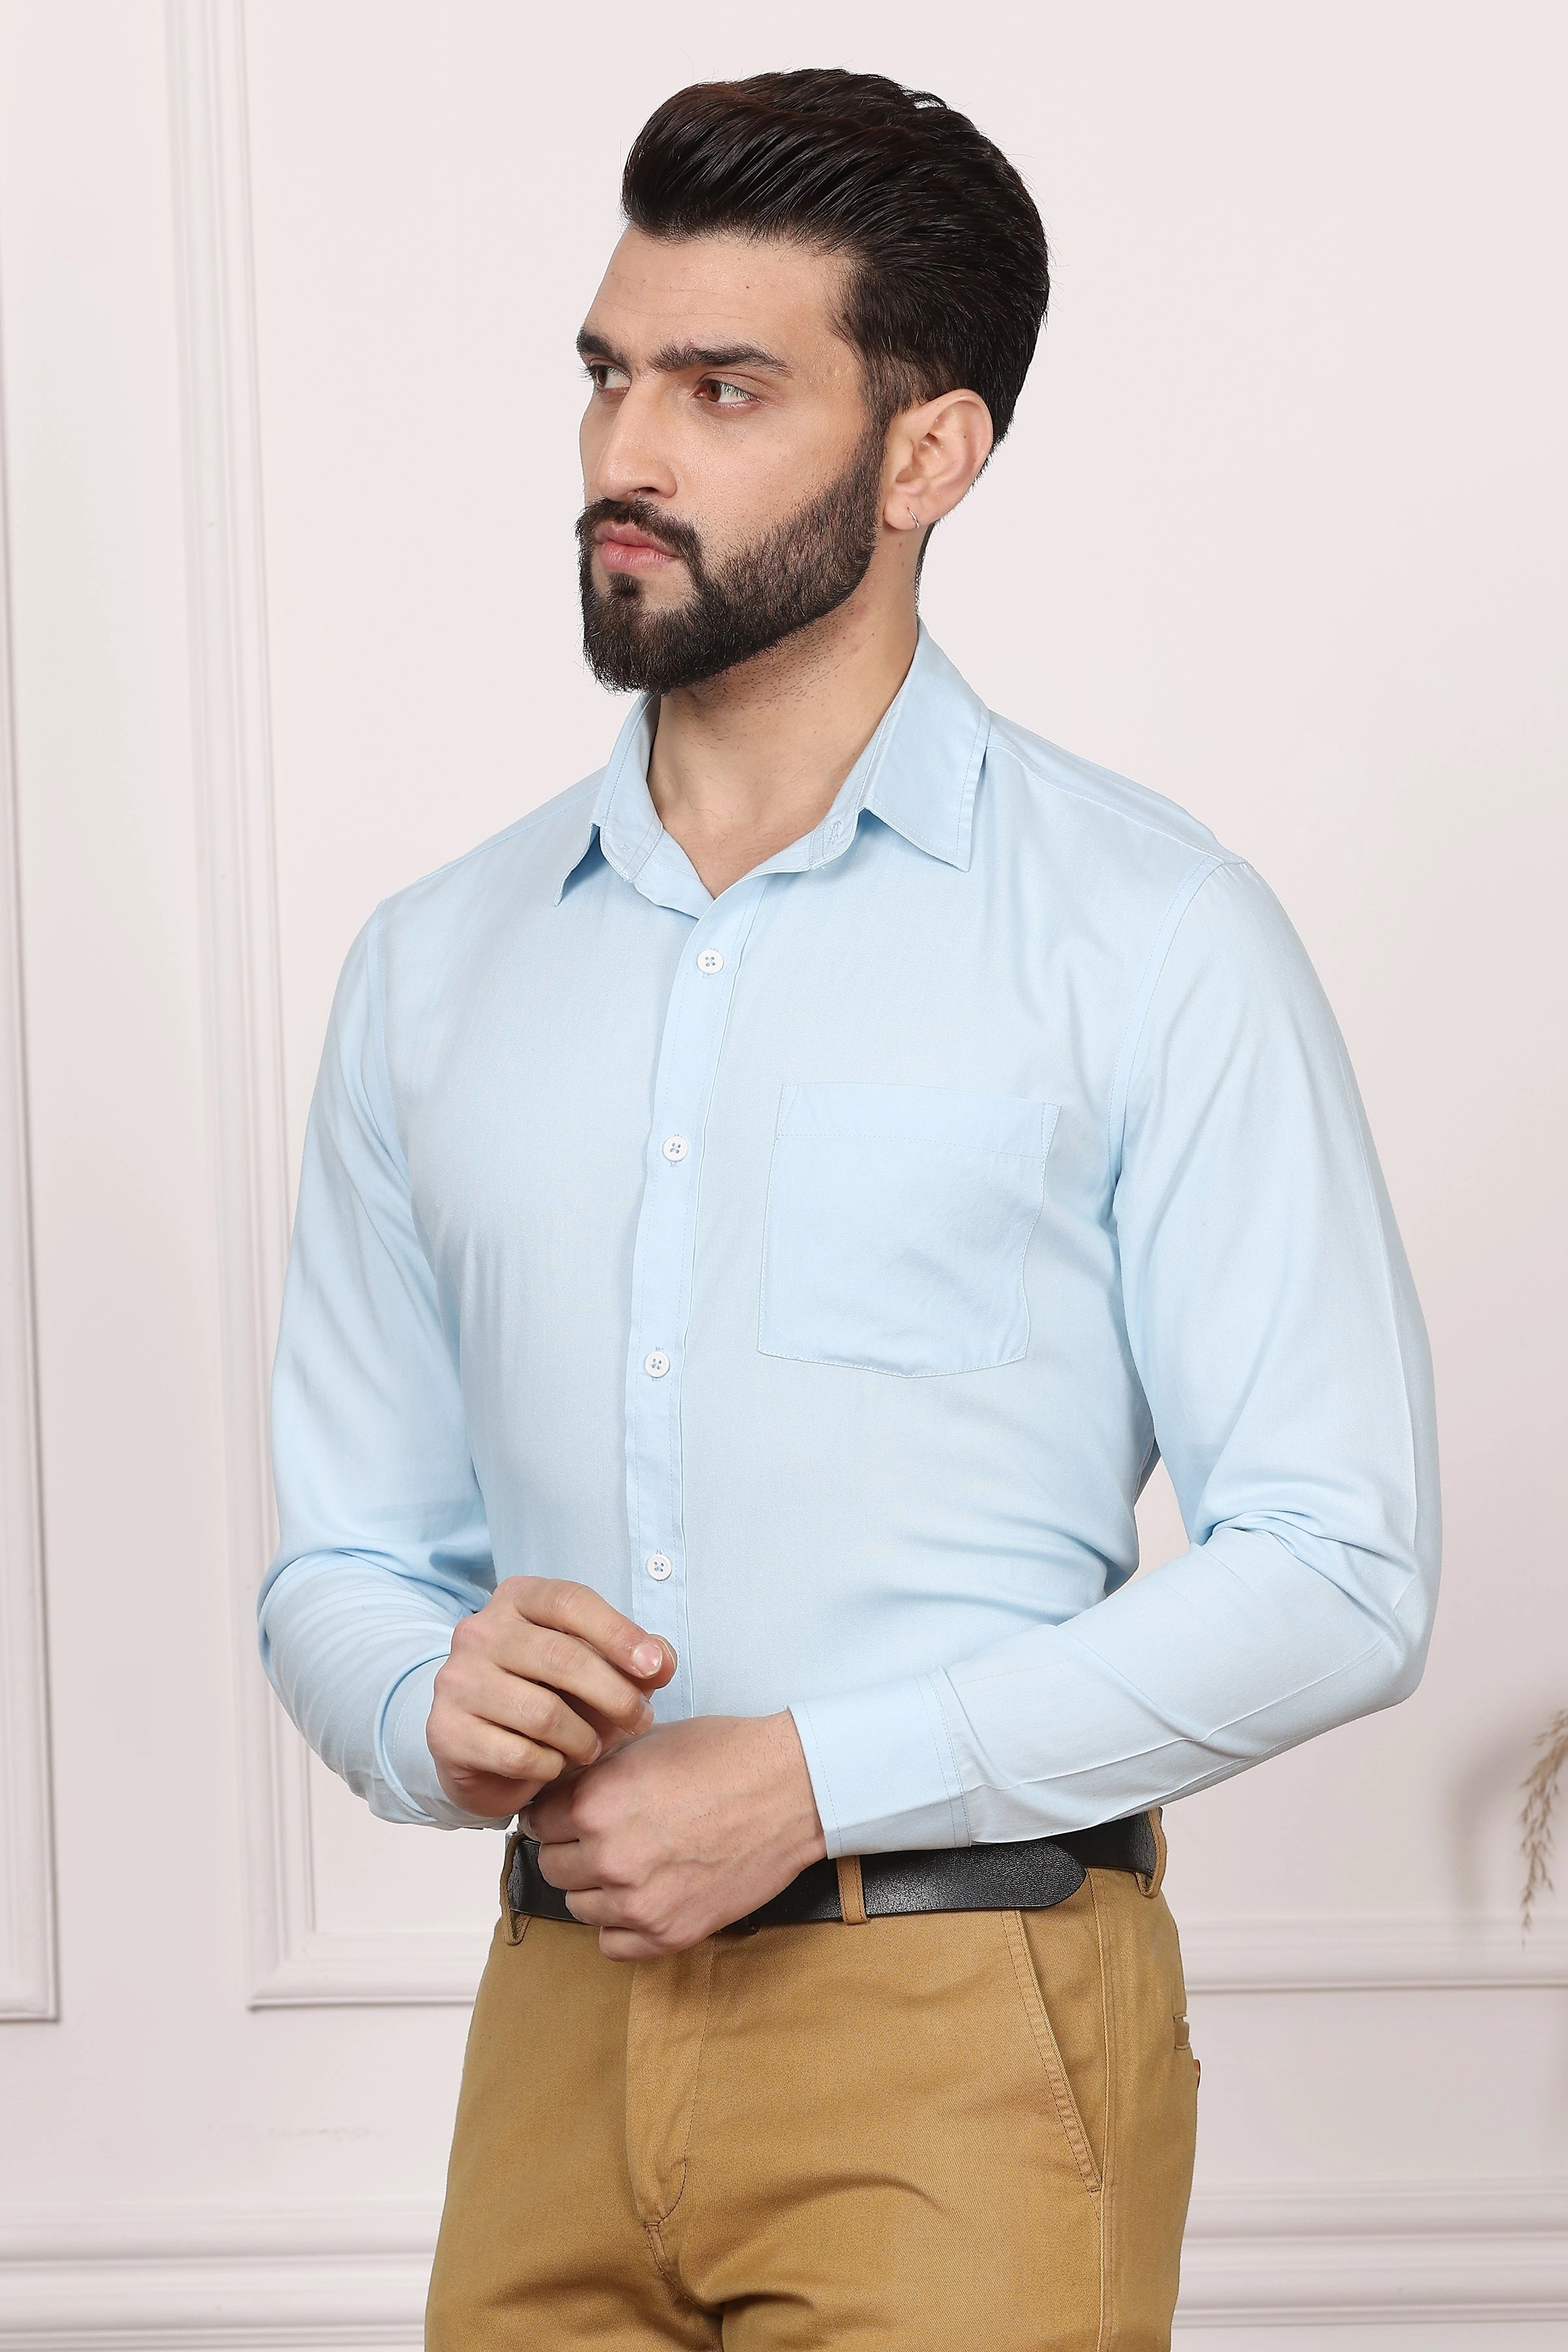 Baby Blue Formal Cotton Shirt-S-1